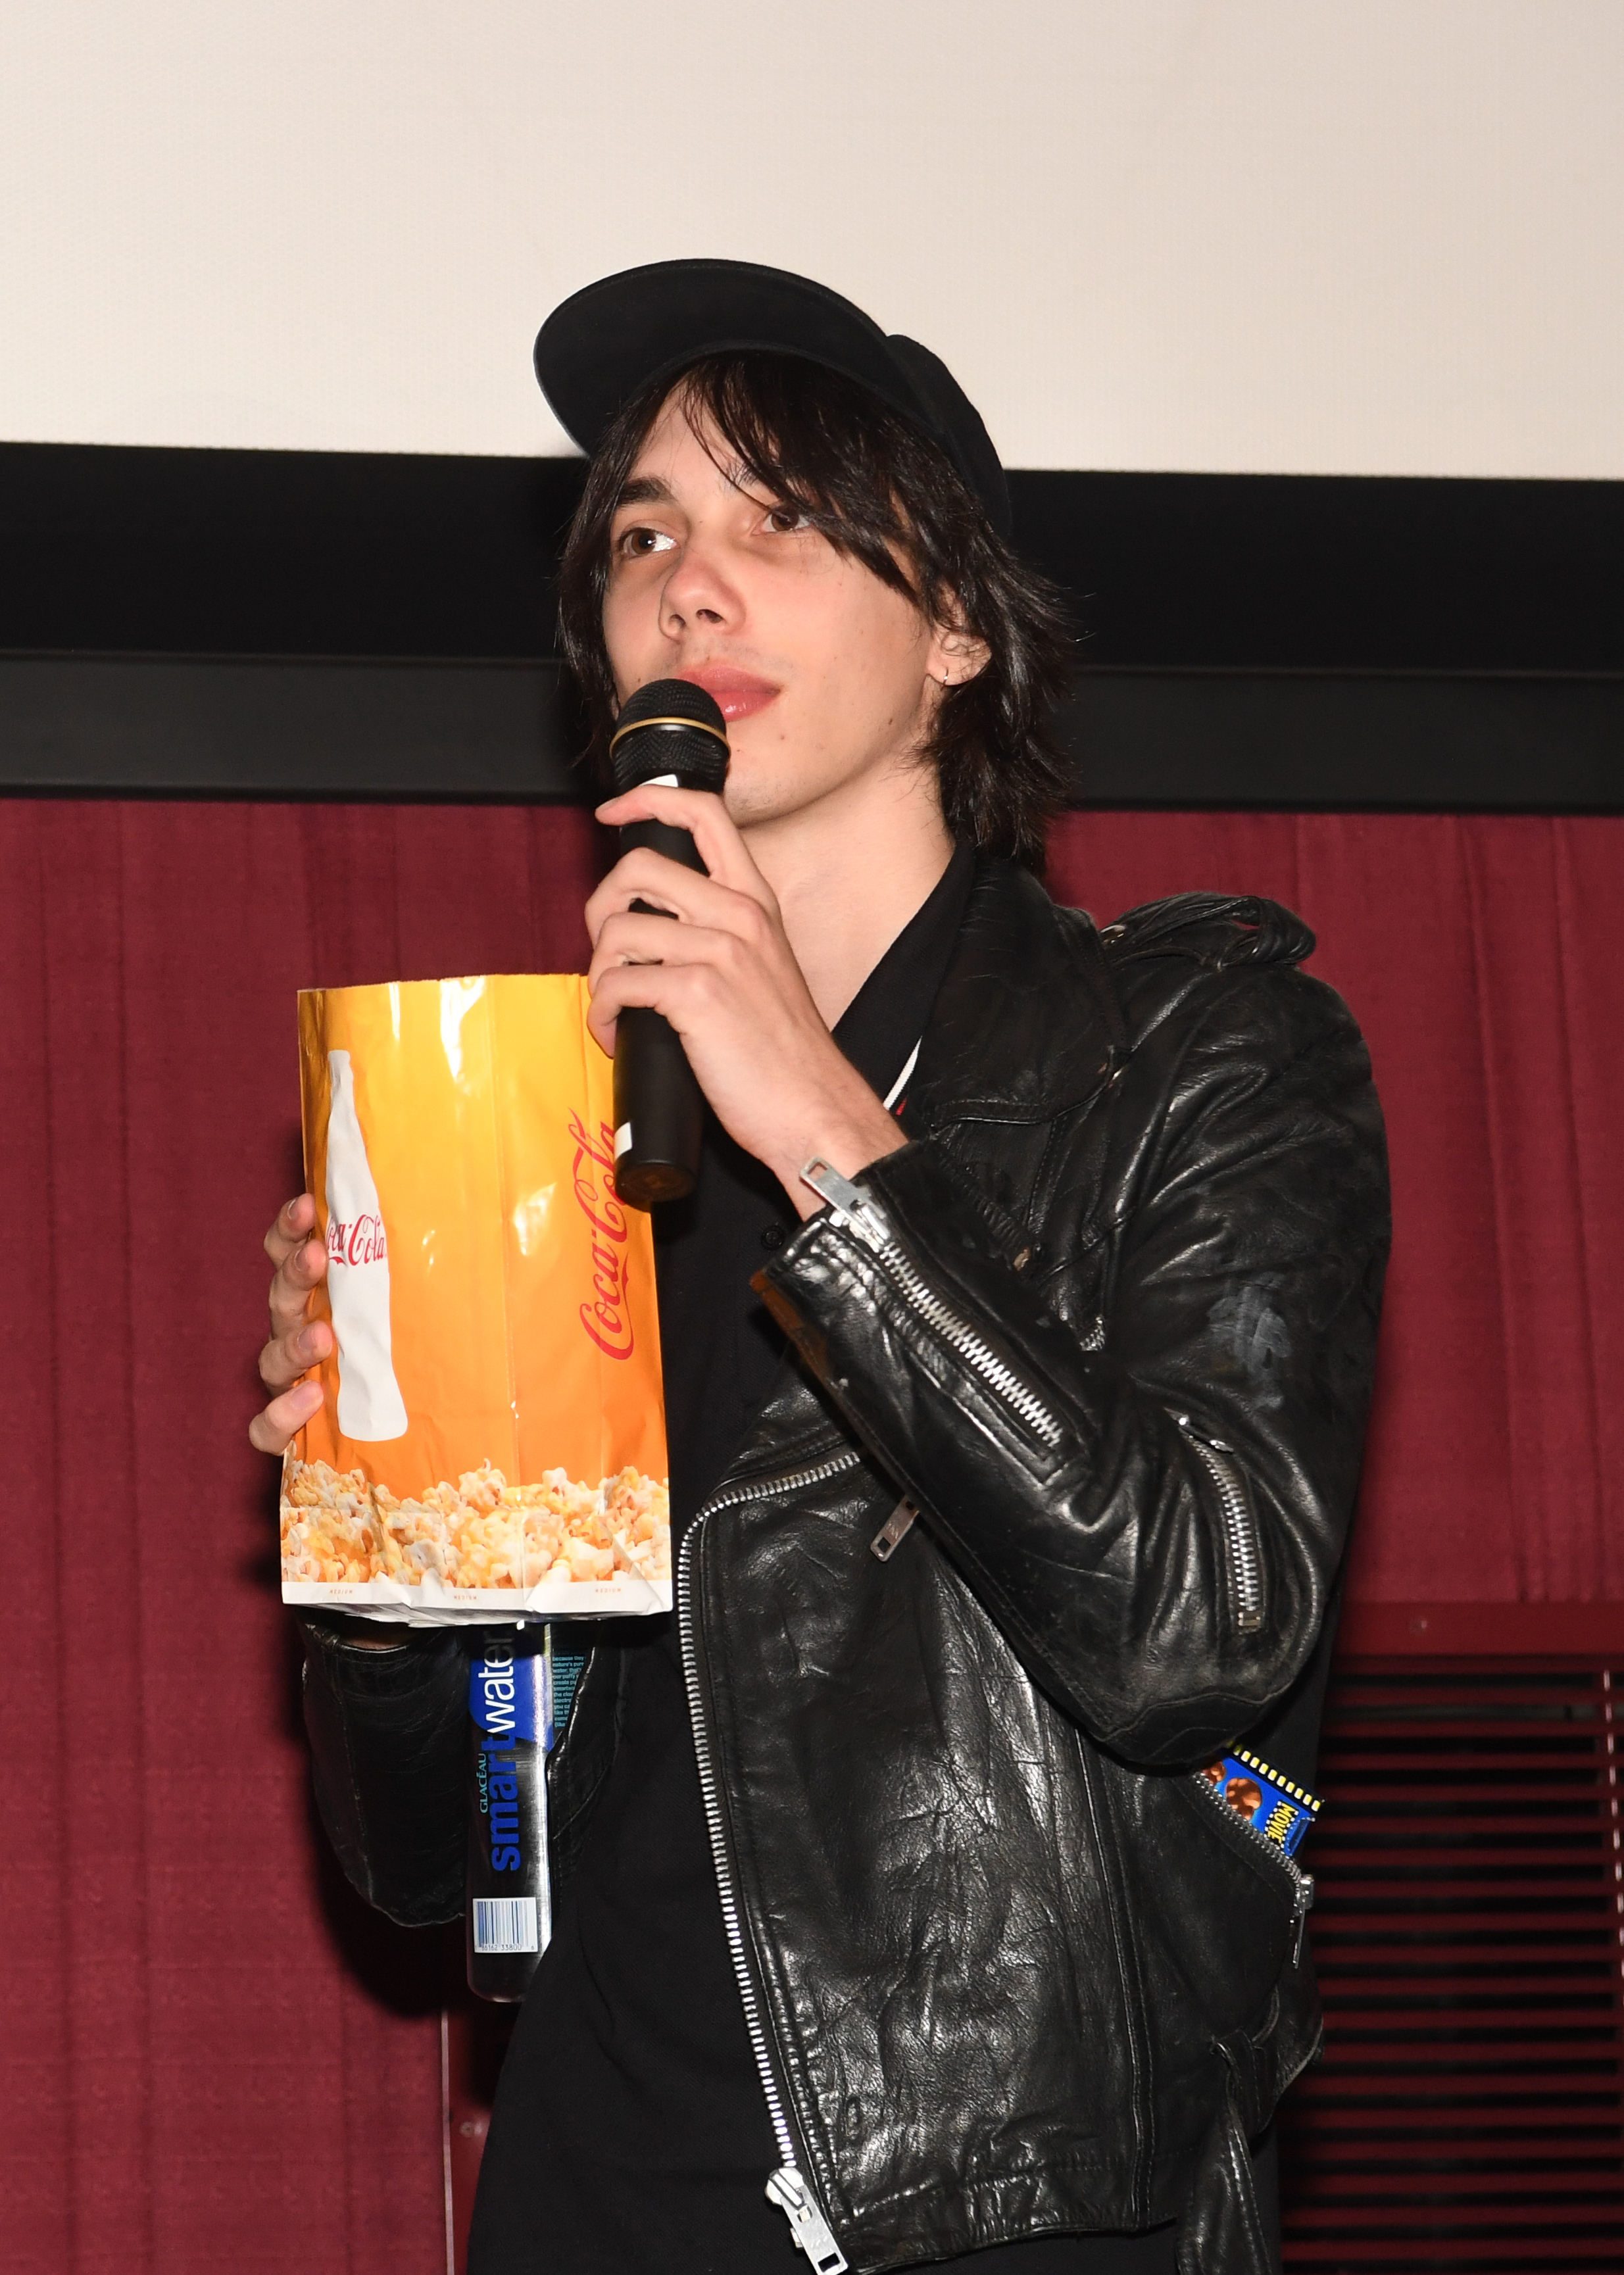 Charlie in a leather jacket and cap holding a microphone and popcorn bucket